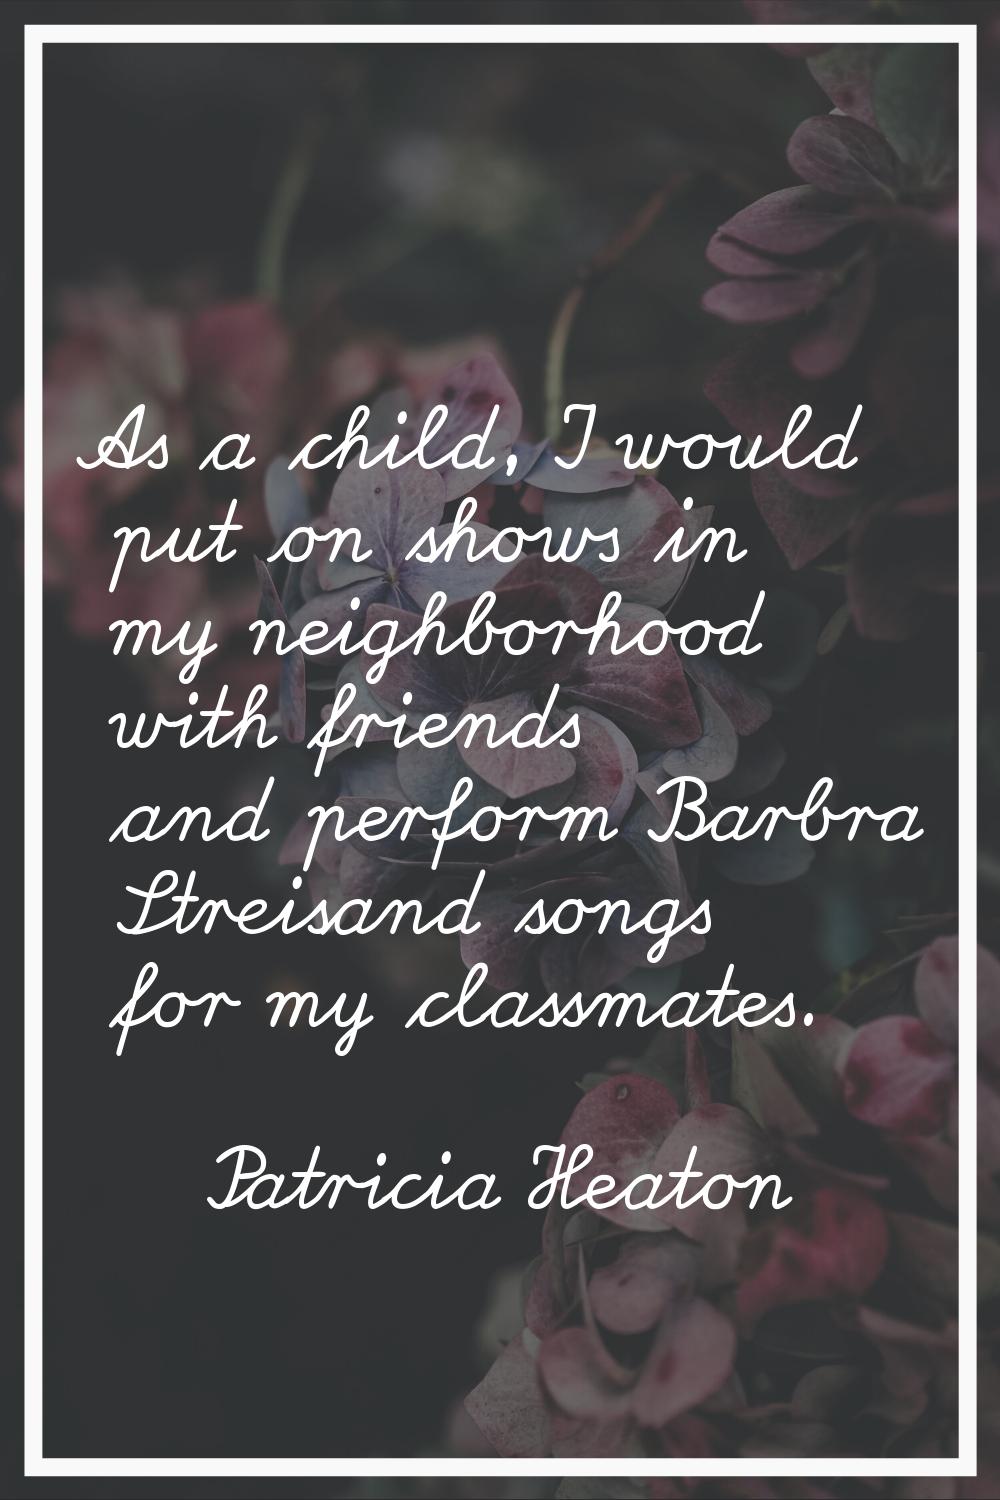 As a child, I would put on shows in my neighborhood with friends and perform Barbra Streisand songs